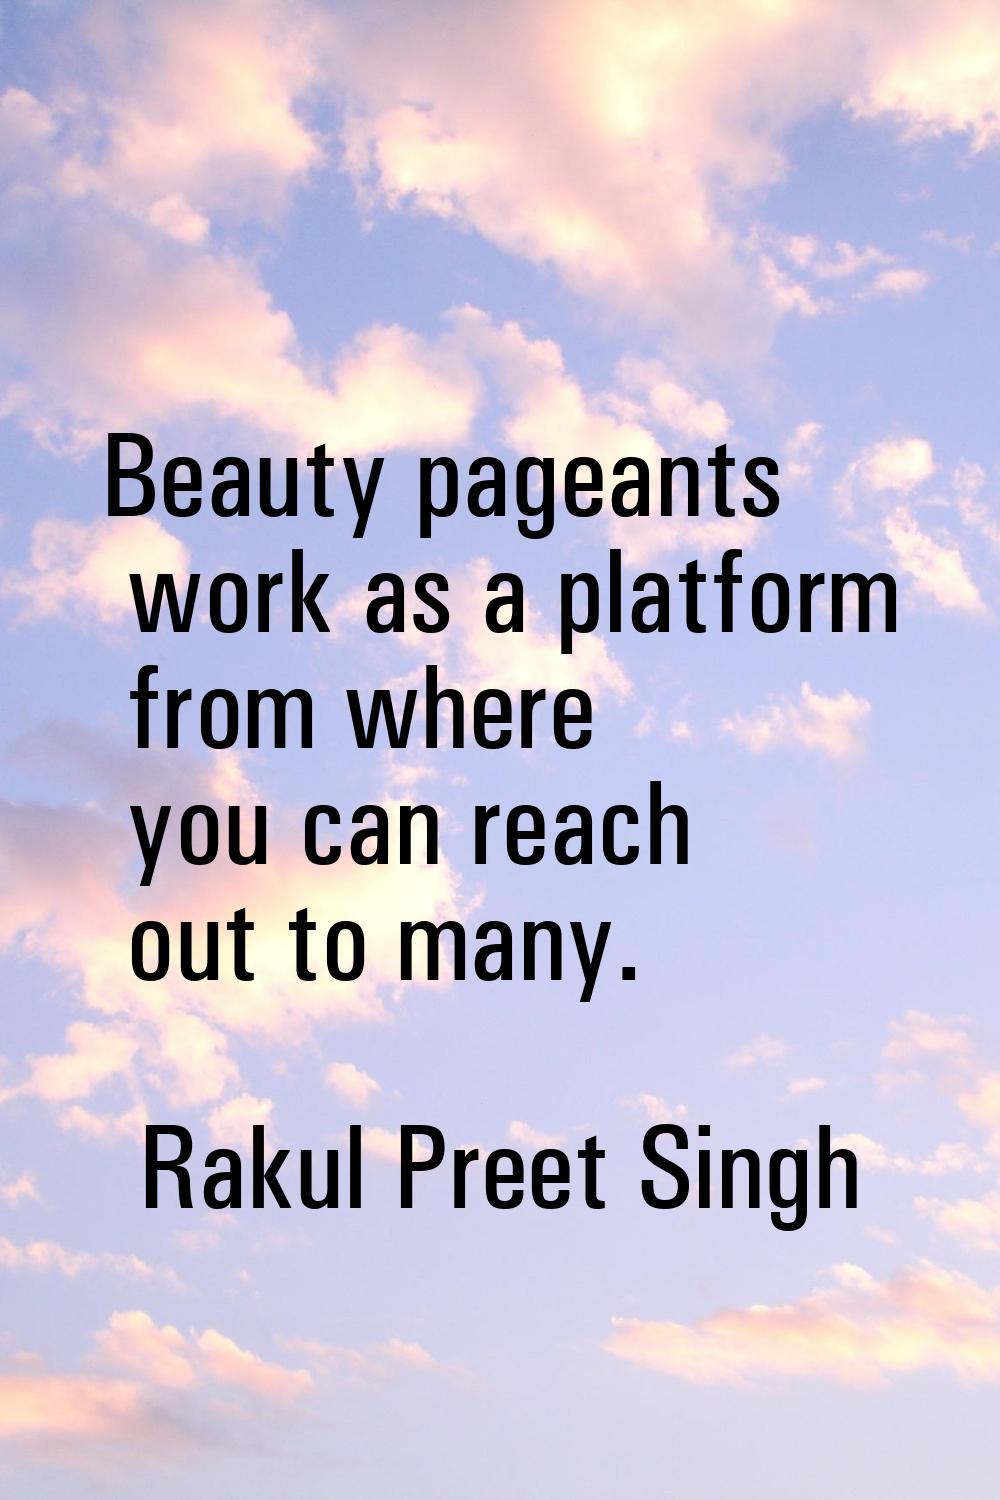 Beauty pageants work as a platform from where you can reach out to many.